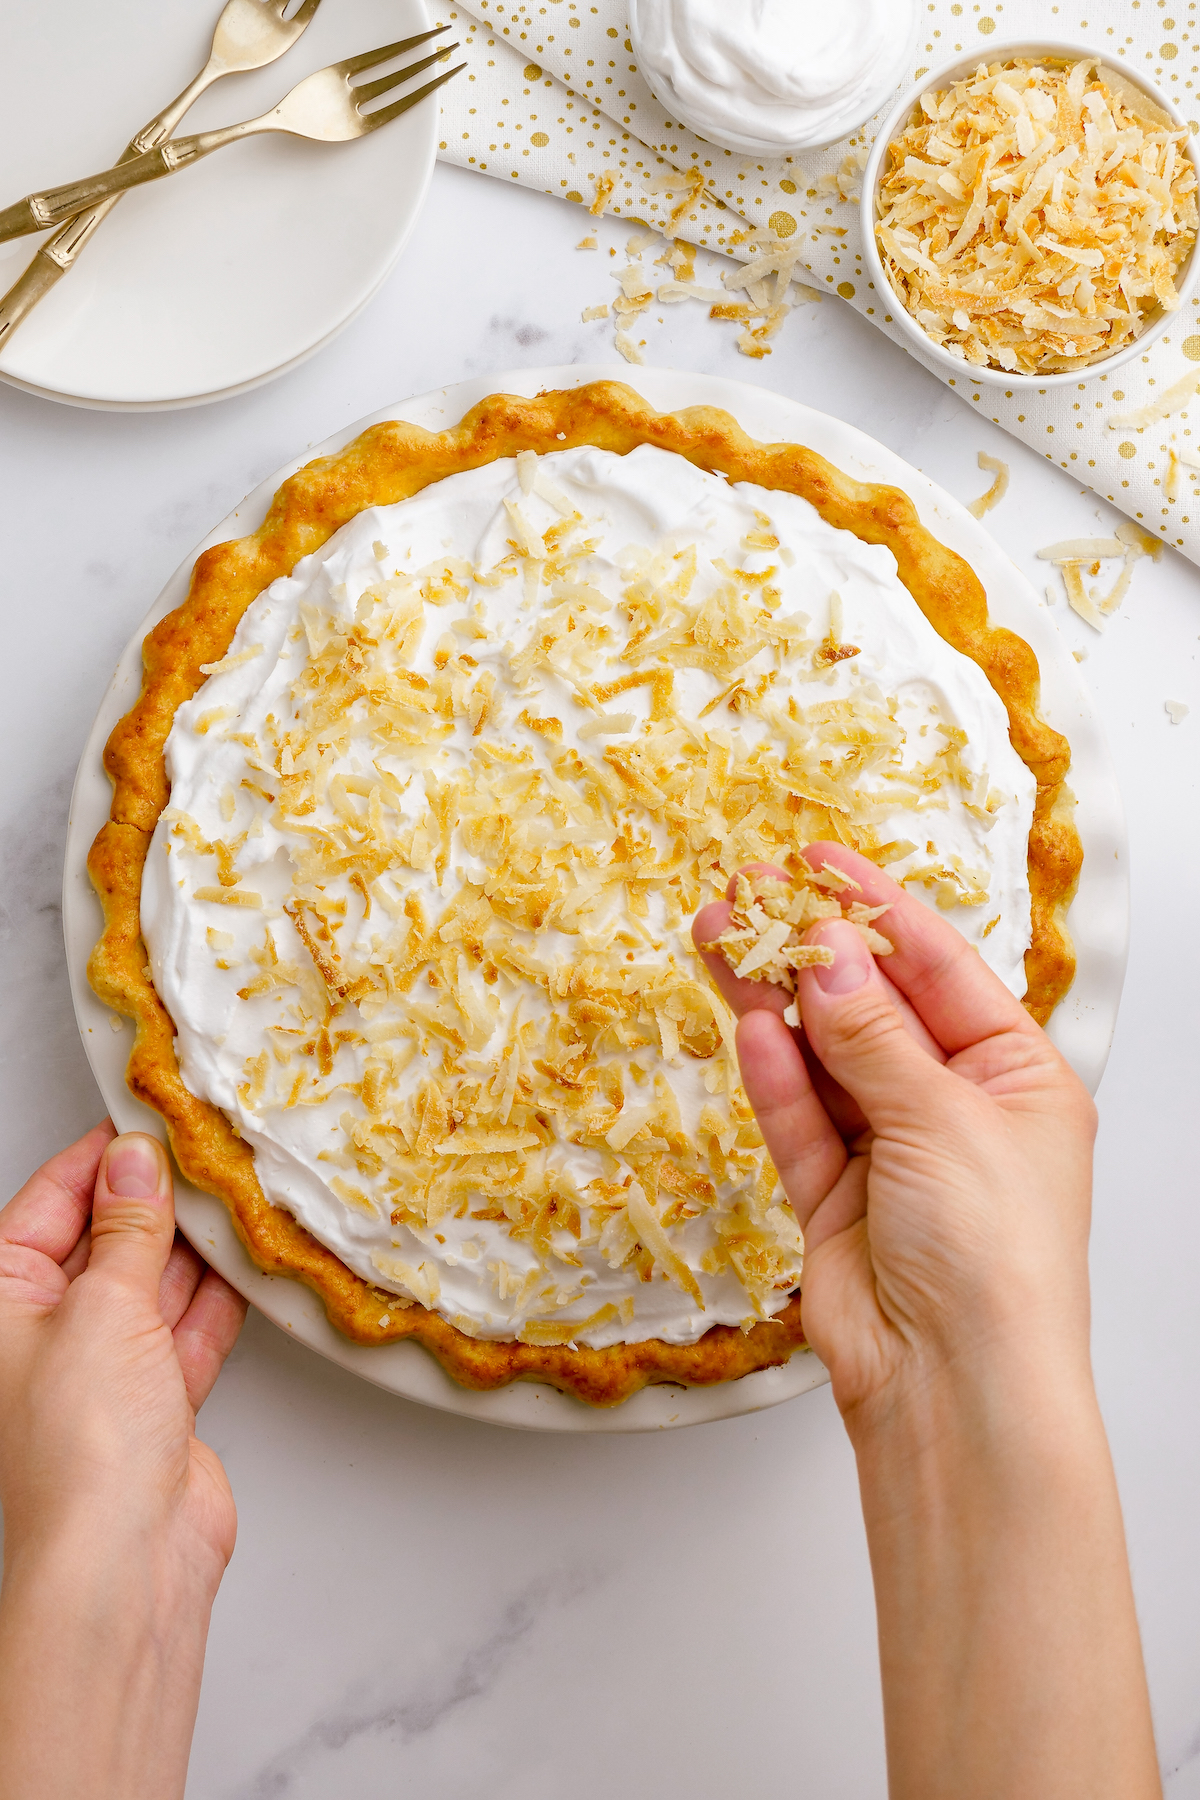 A coconut cream pie being decorated with sweetened toasted coconut.